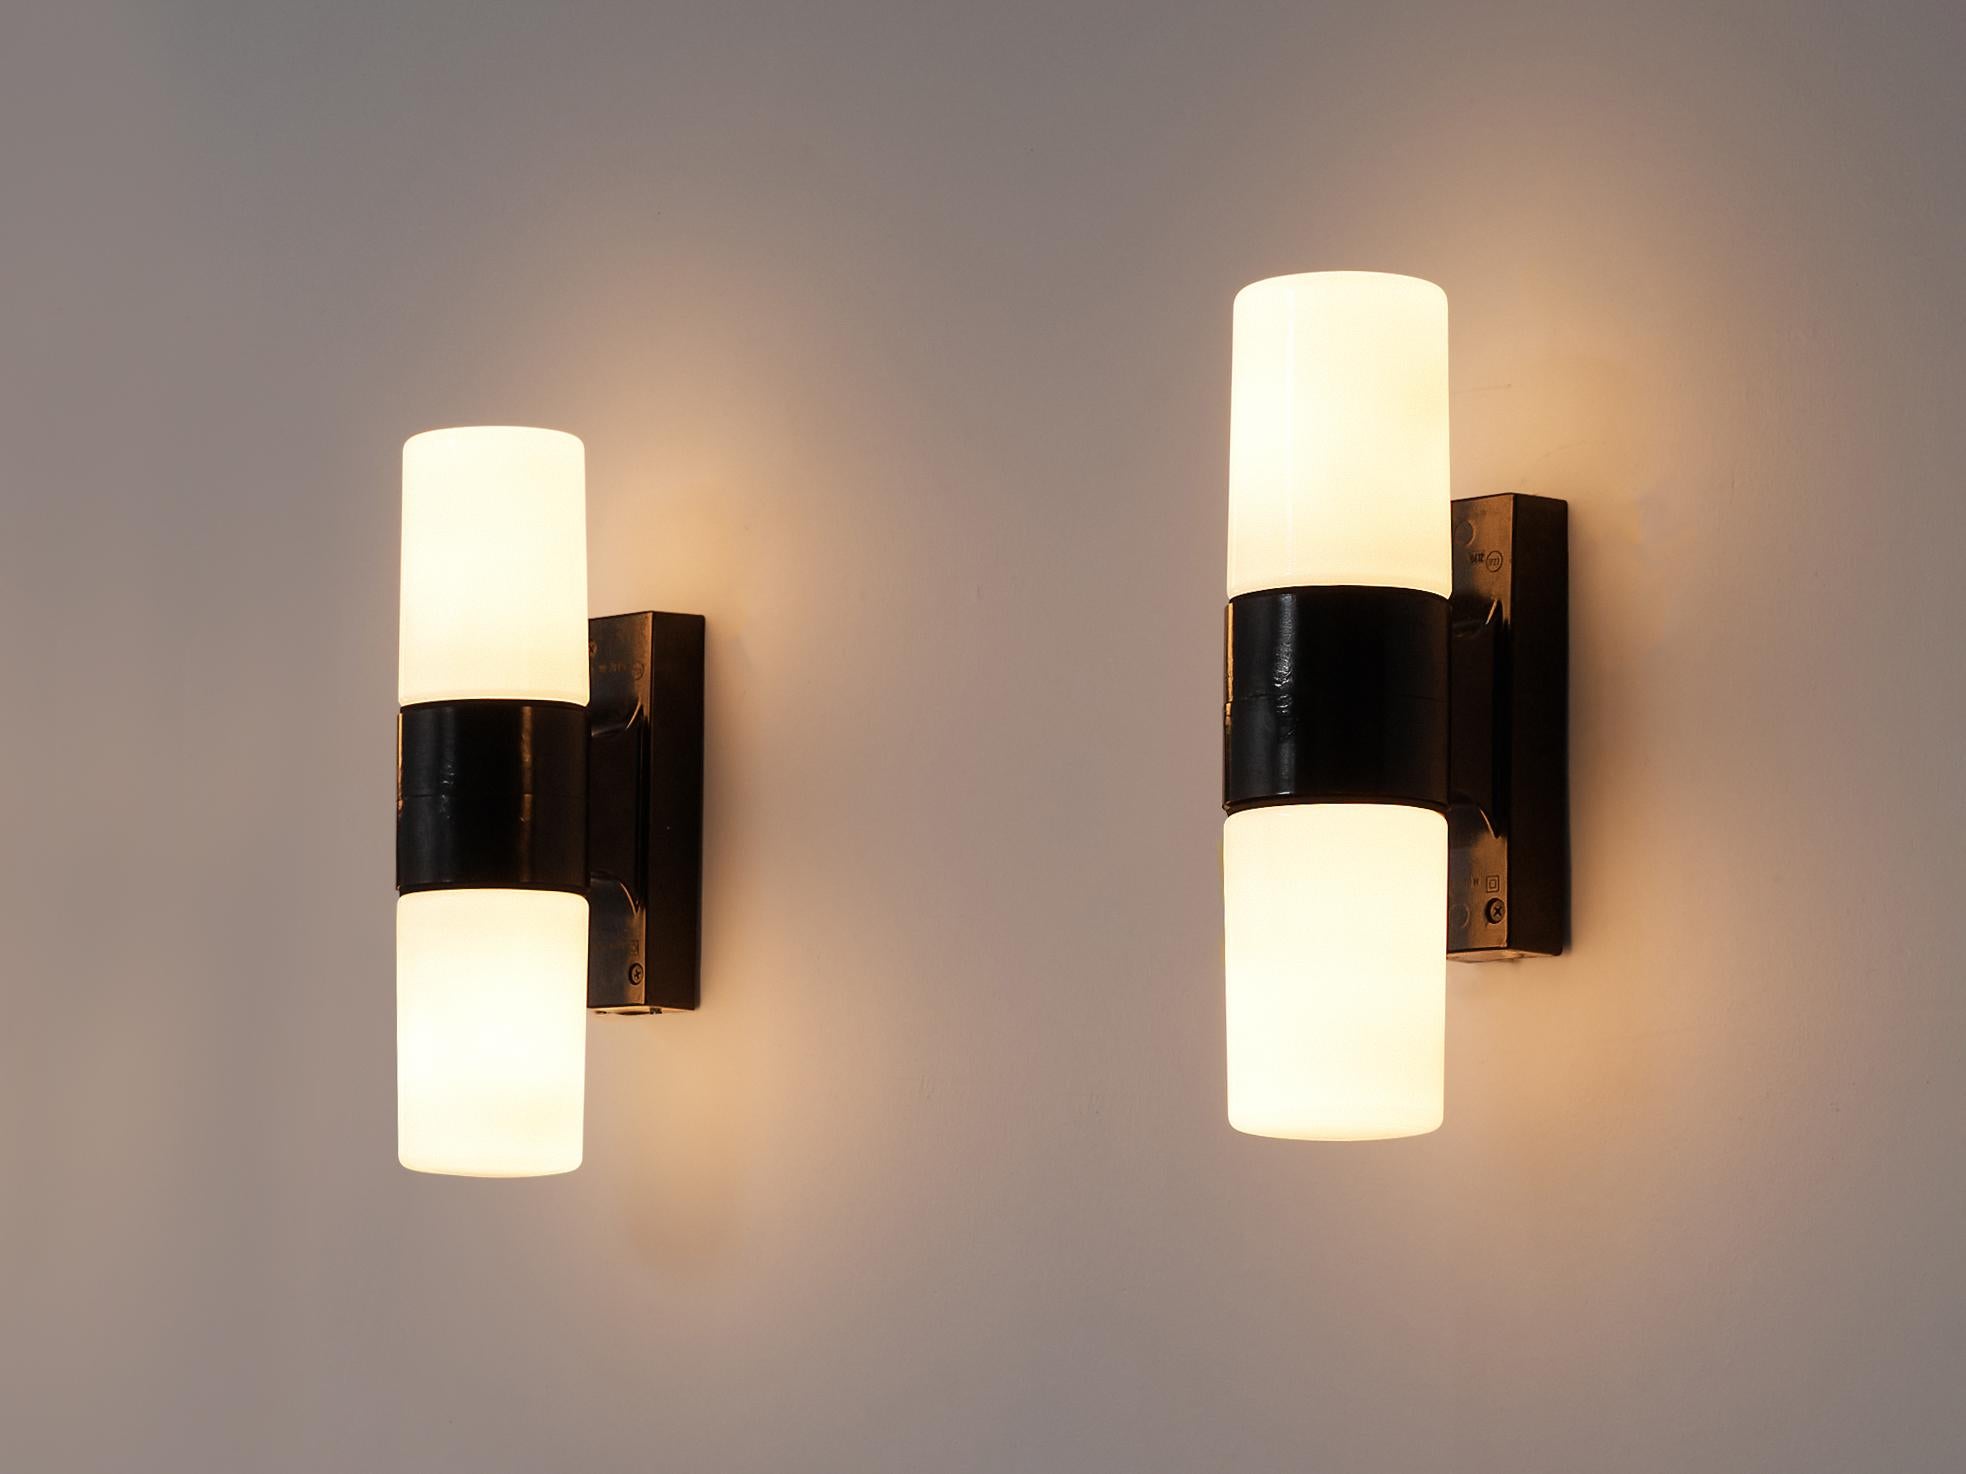 ESC Zukov, wall lights model 213, Bakelite, opaline glass, Czech Republic, 1950s

Resemblance to Bauhaus architect Wilhelm Wagenfeld’s wall lamp 6040 yet these lamps differ in materials and proportions. The Bauhaus inspired wall lamps by Czech